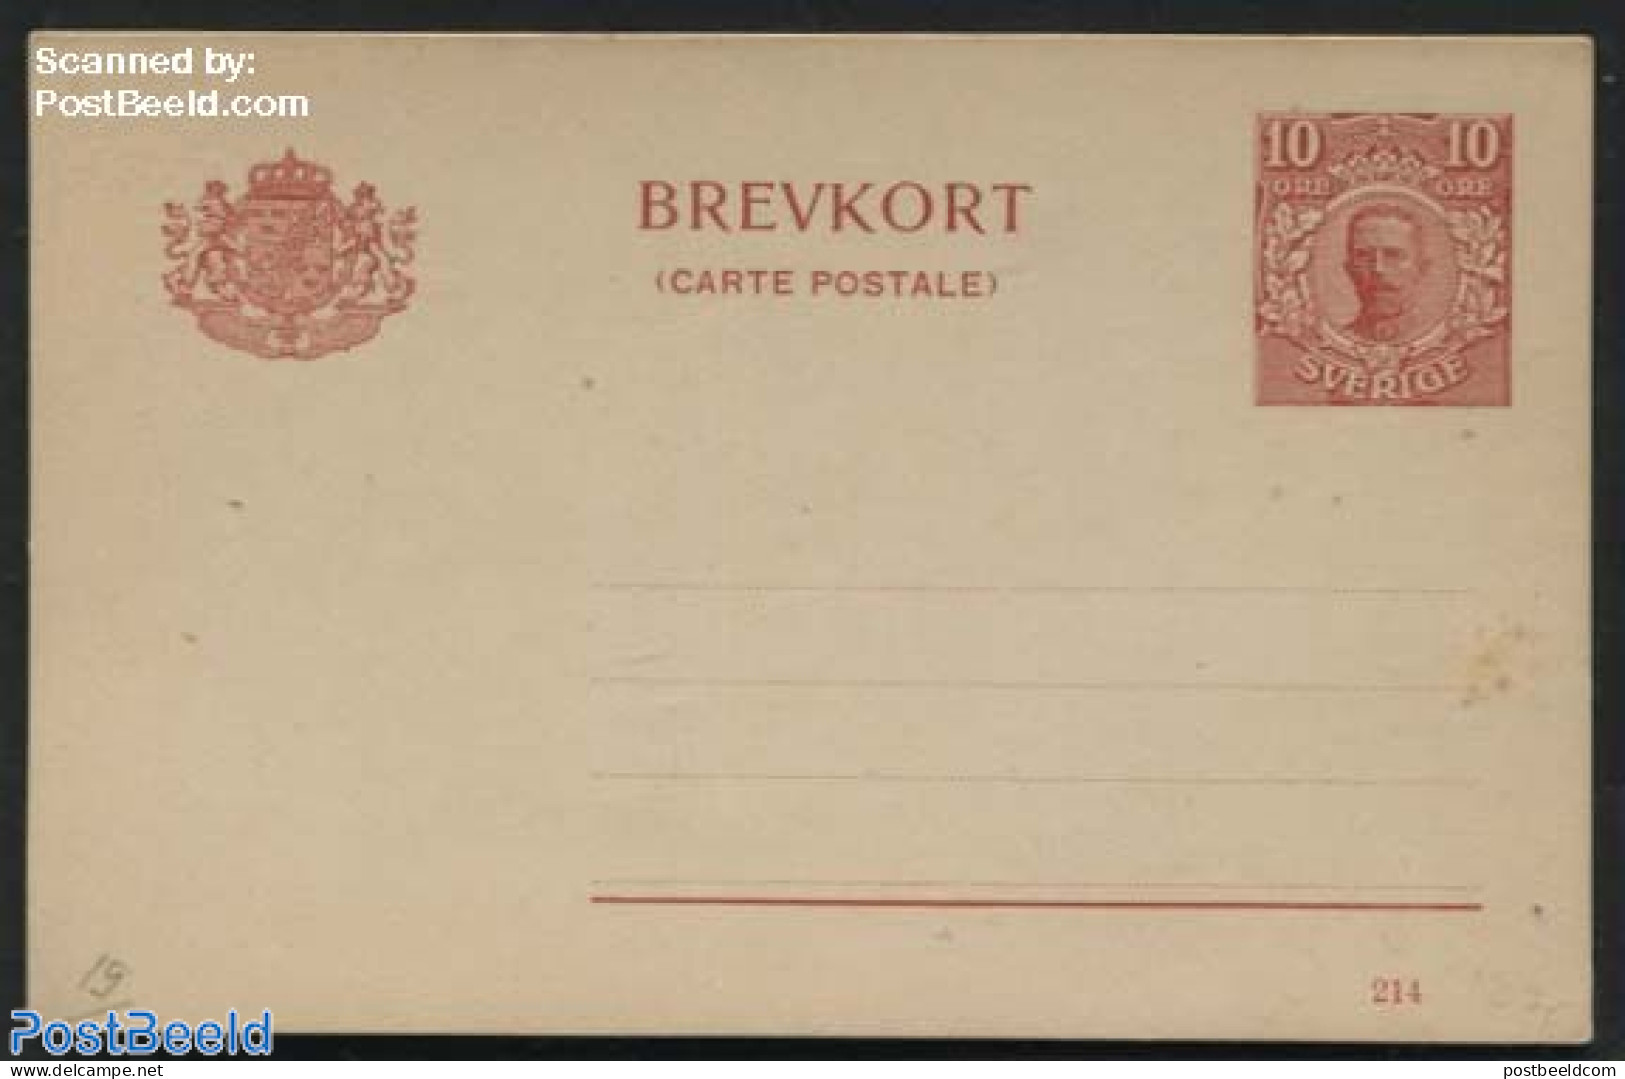 Sweden 1914 Postcard 10o, With Printing Date 214, Unused Postal Stationary - Covers & Documents